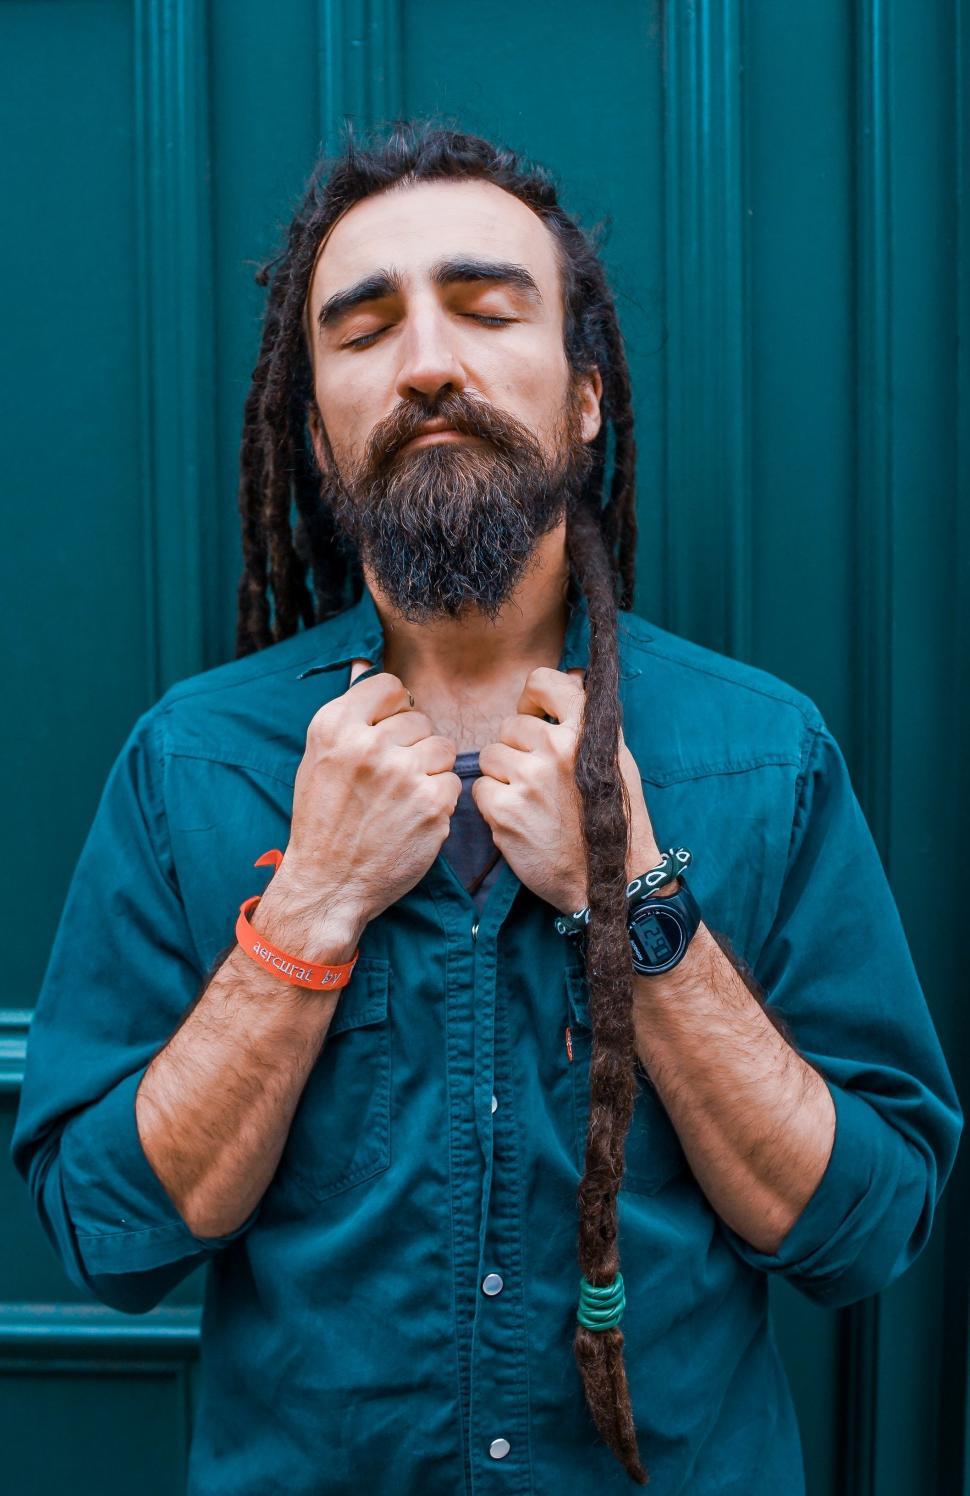 Free Image of Man With Dreadlocks and Blue Shirt 